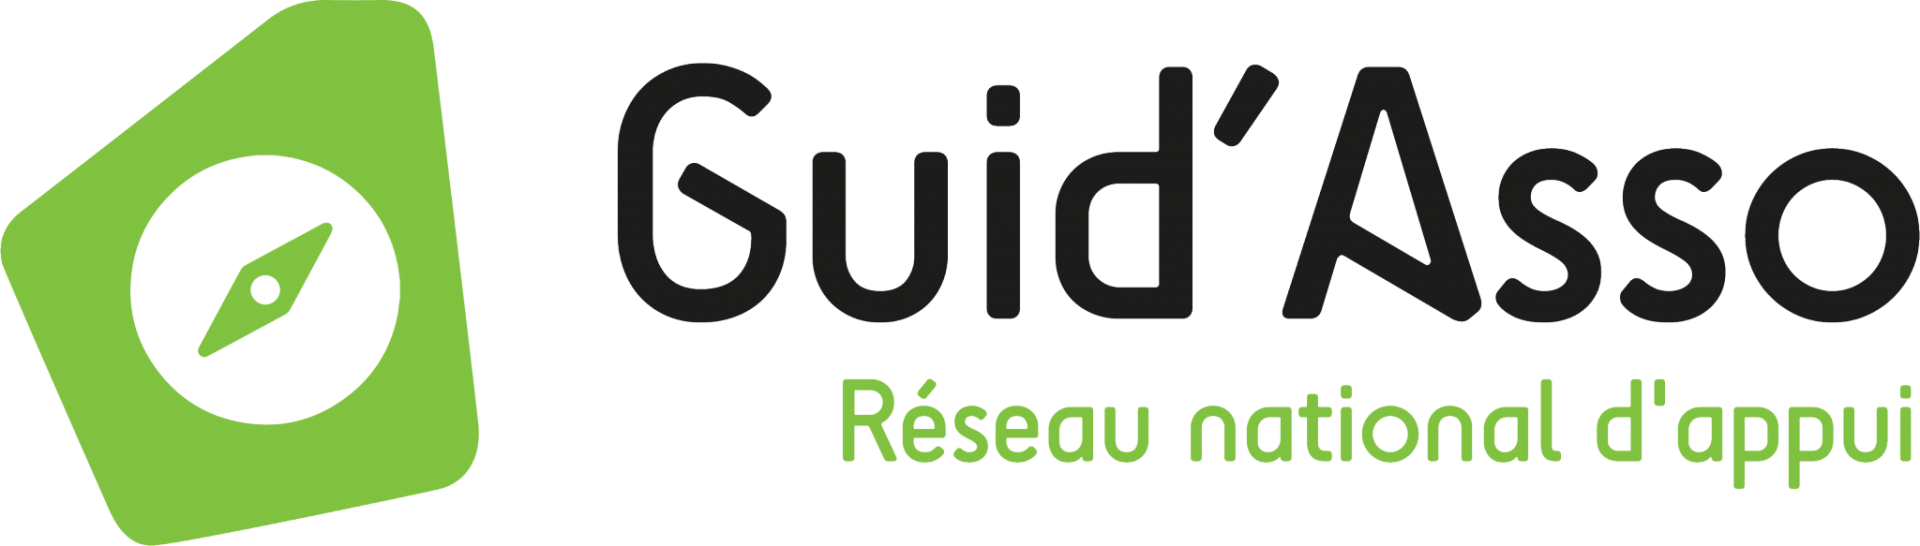 Guid asso logotype national